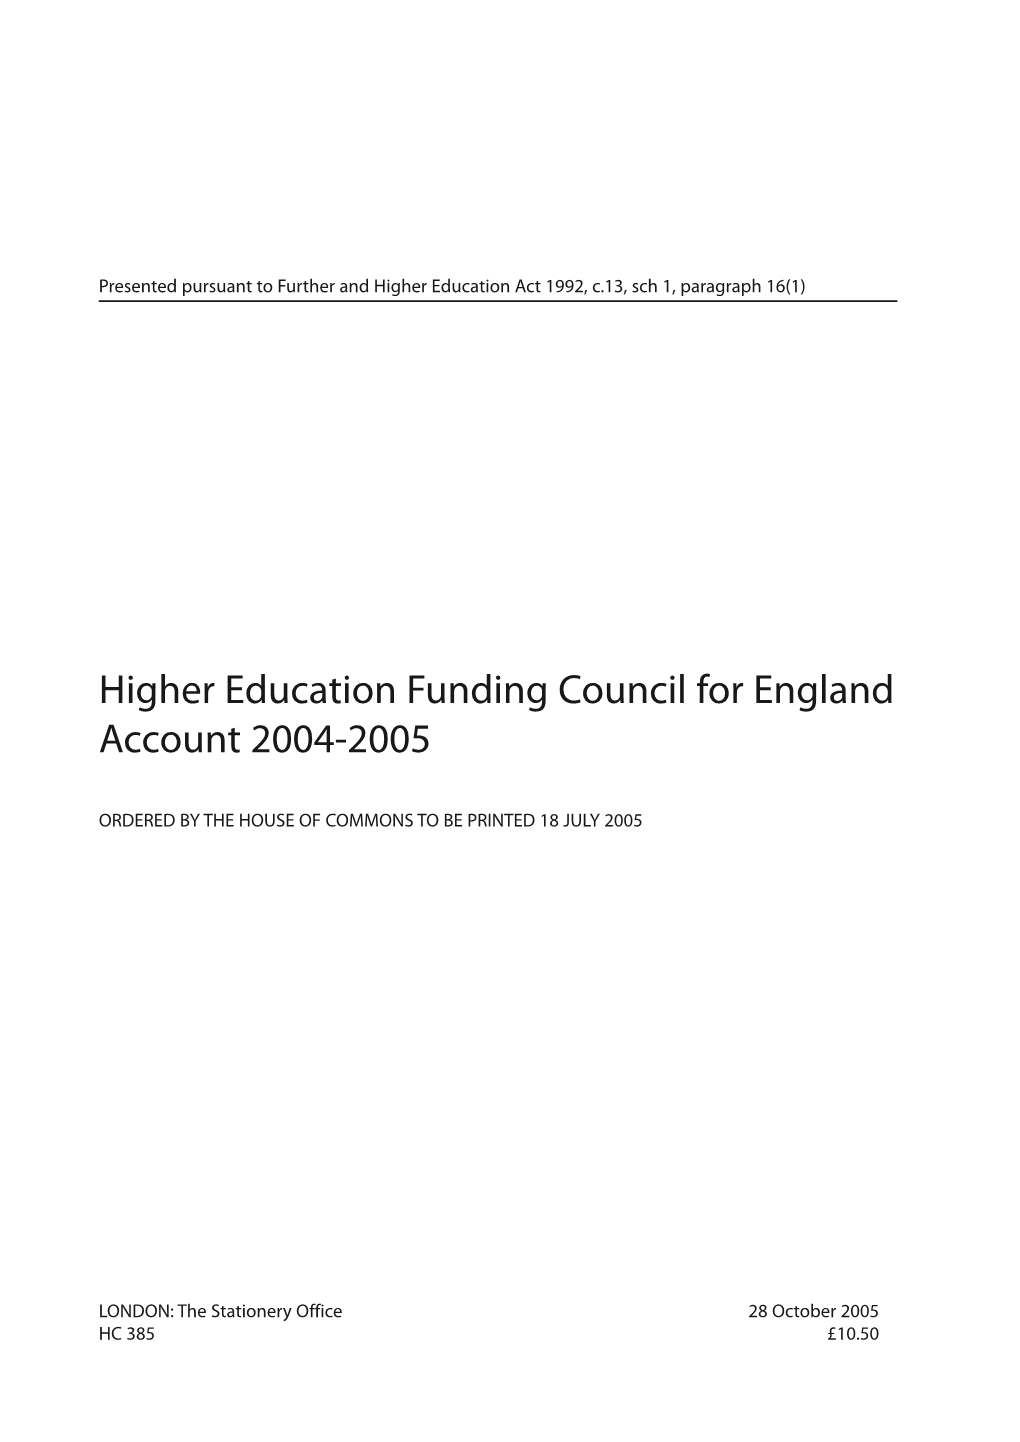 Higher Education Funding Council for England Account 2004-2005